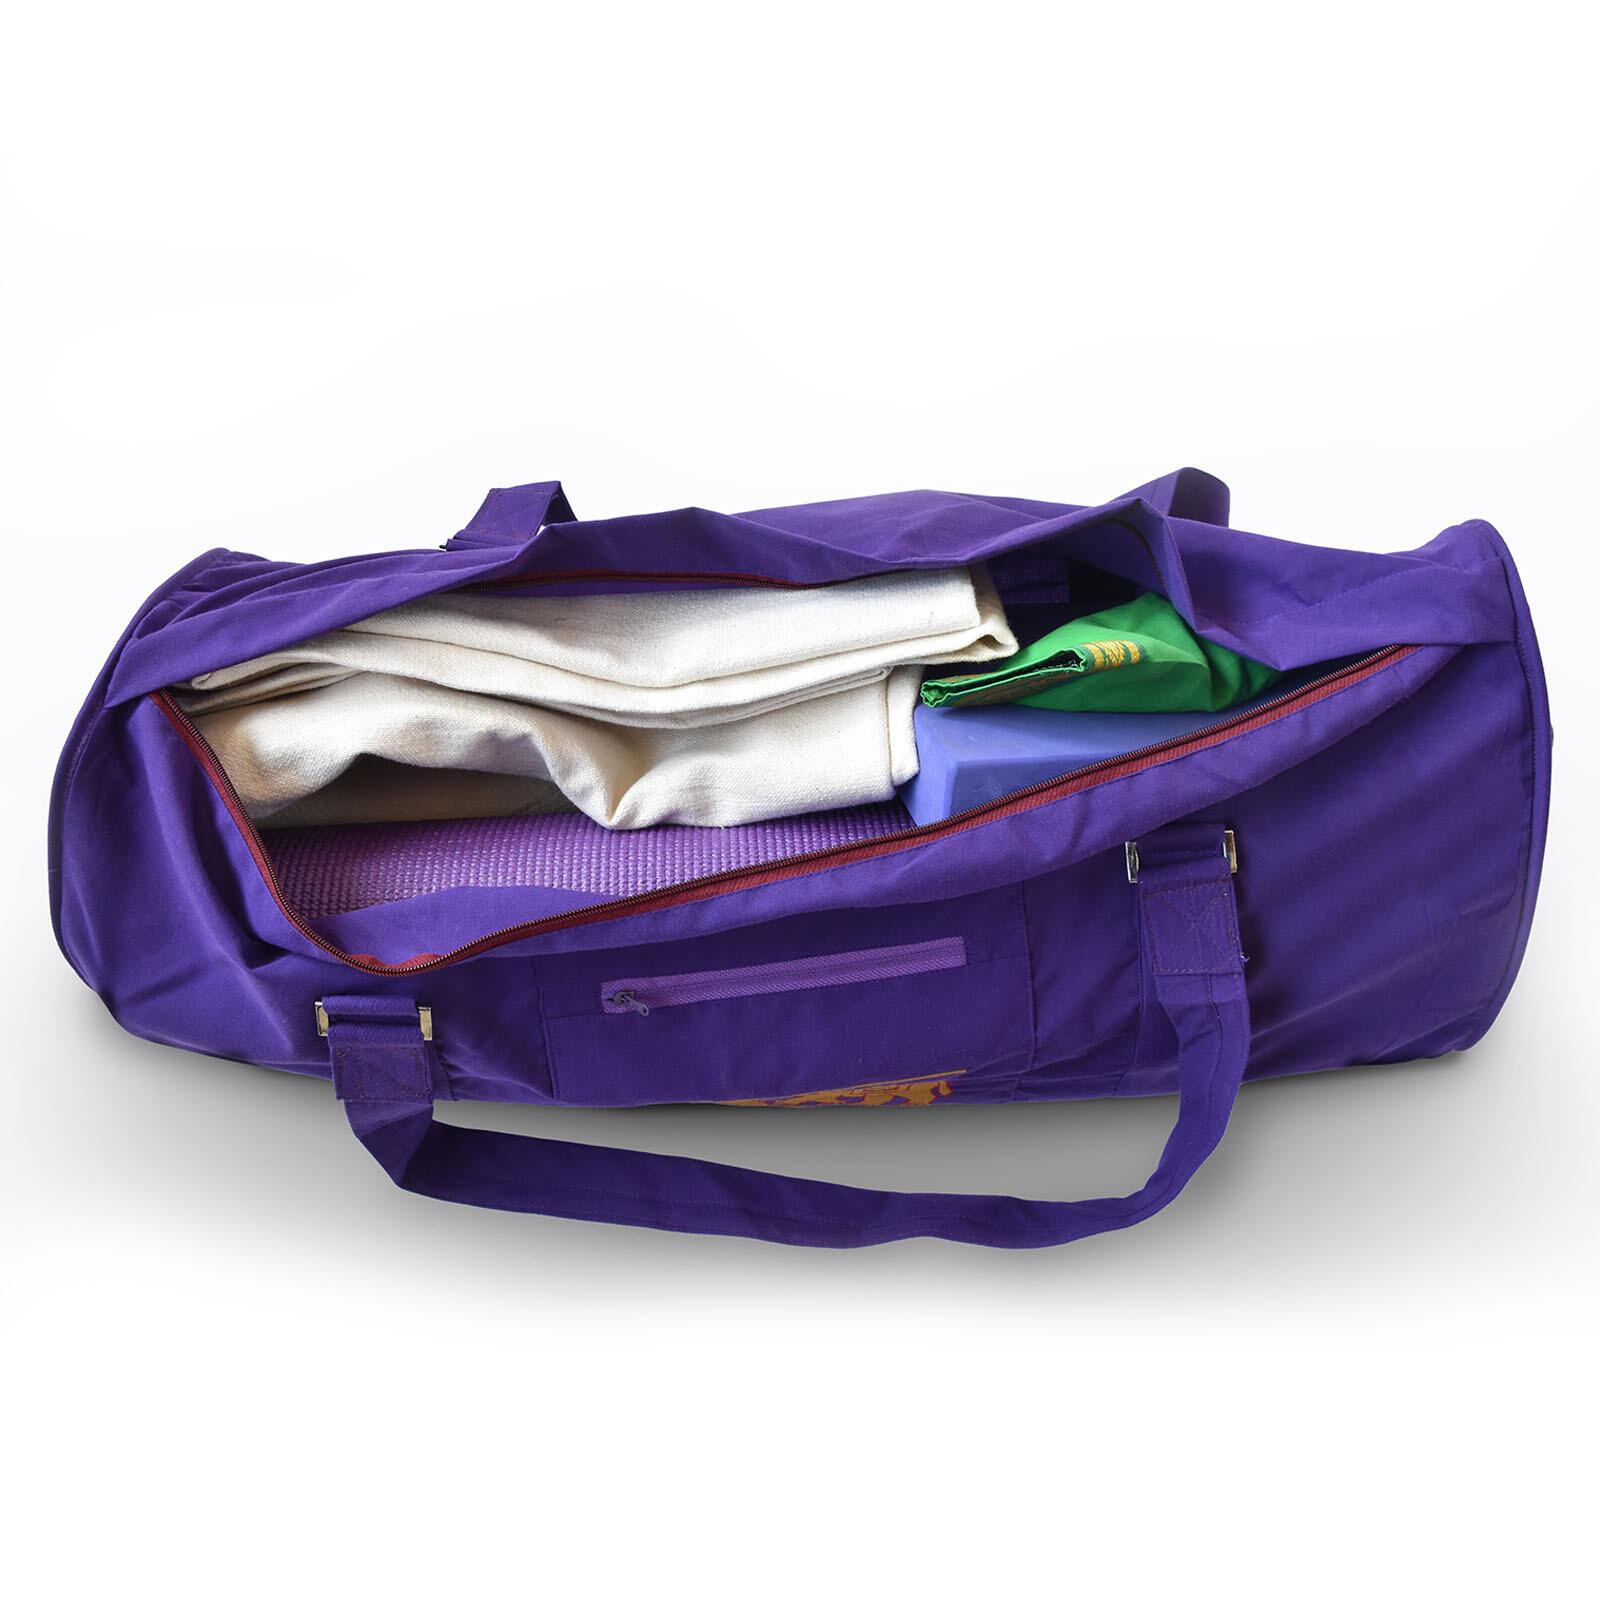 filled with props in yoga kit bag purple colours